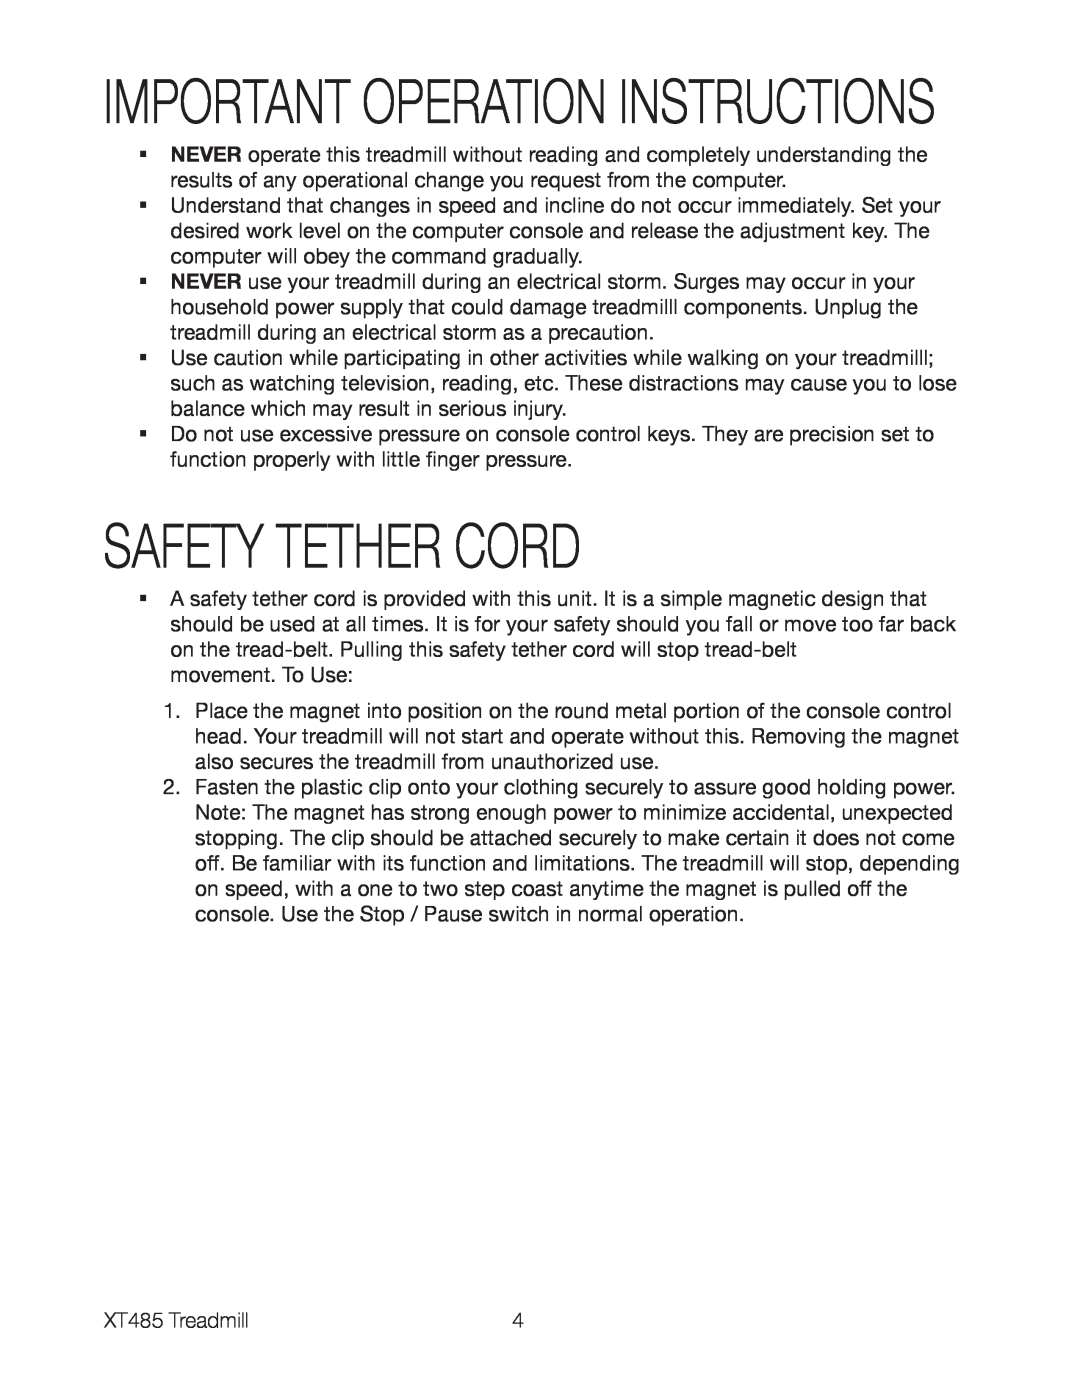 Spirit XT485 owner manual Safety Tether Cord, Important Operation Instructions 